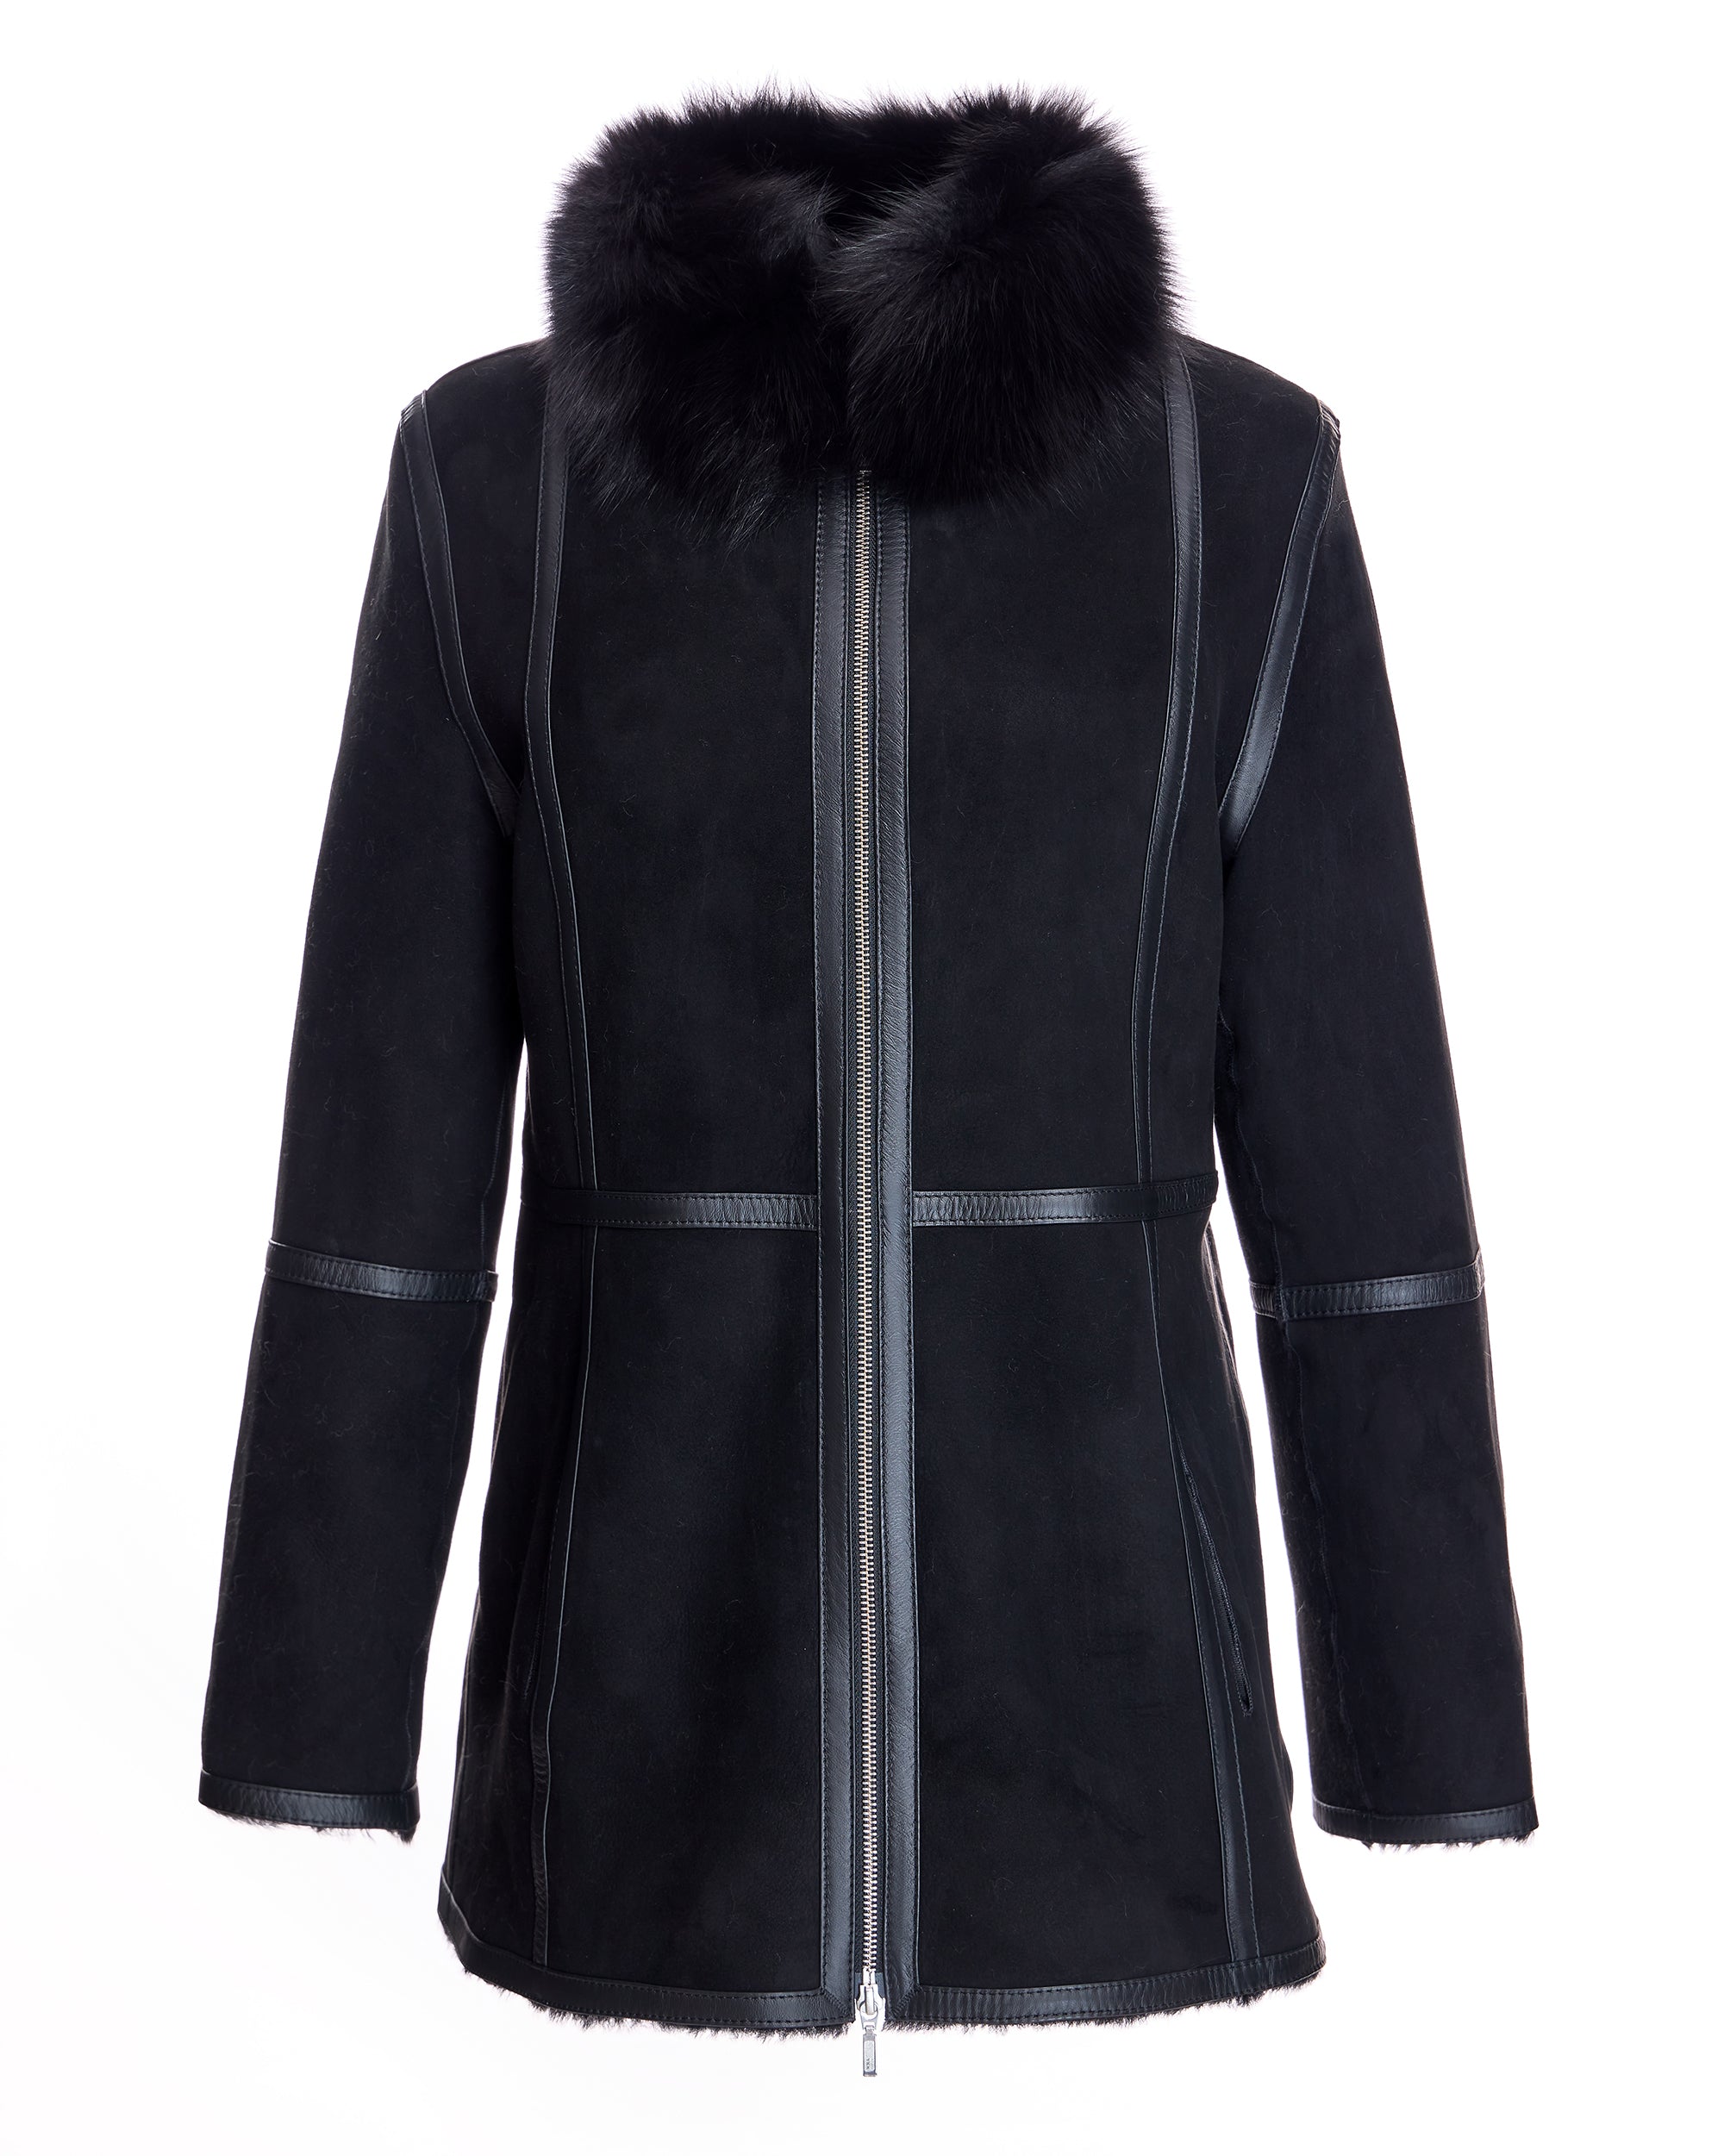 Shearling Lamb Jacket with Fox Stand Collar